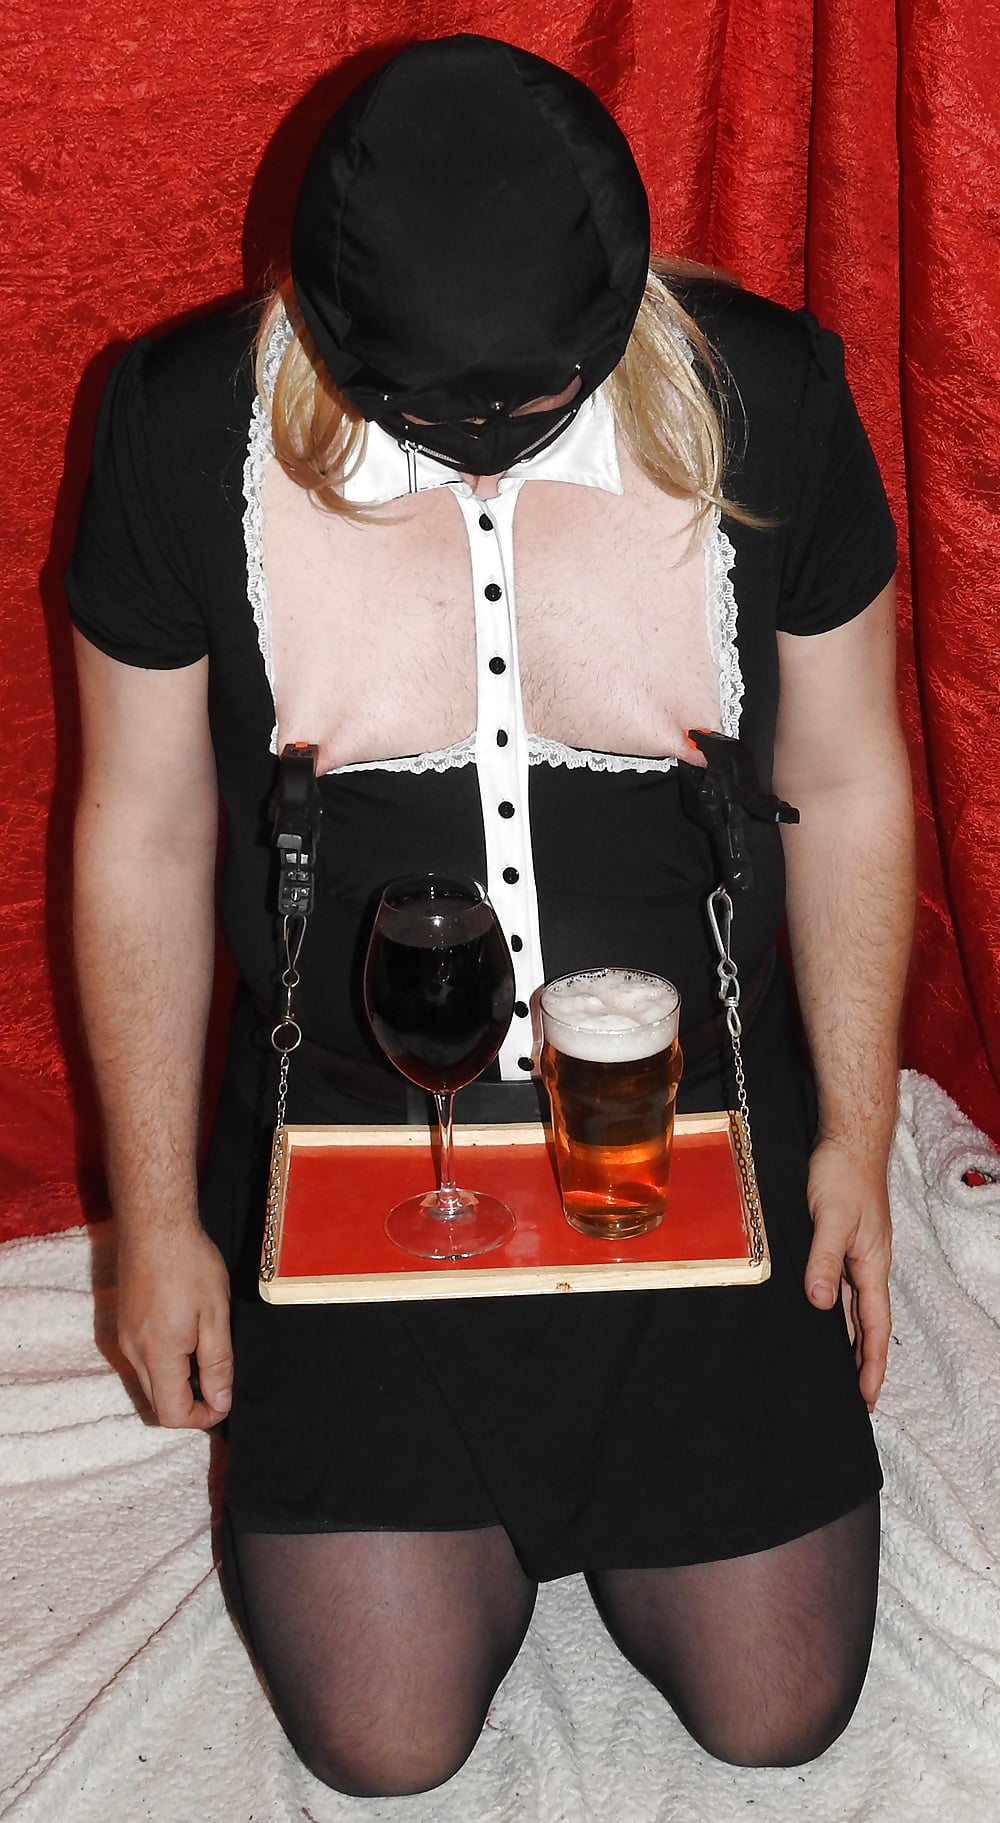 Sissy Served drinks by Glass #107320586